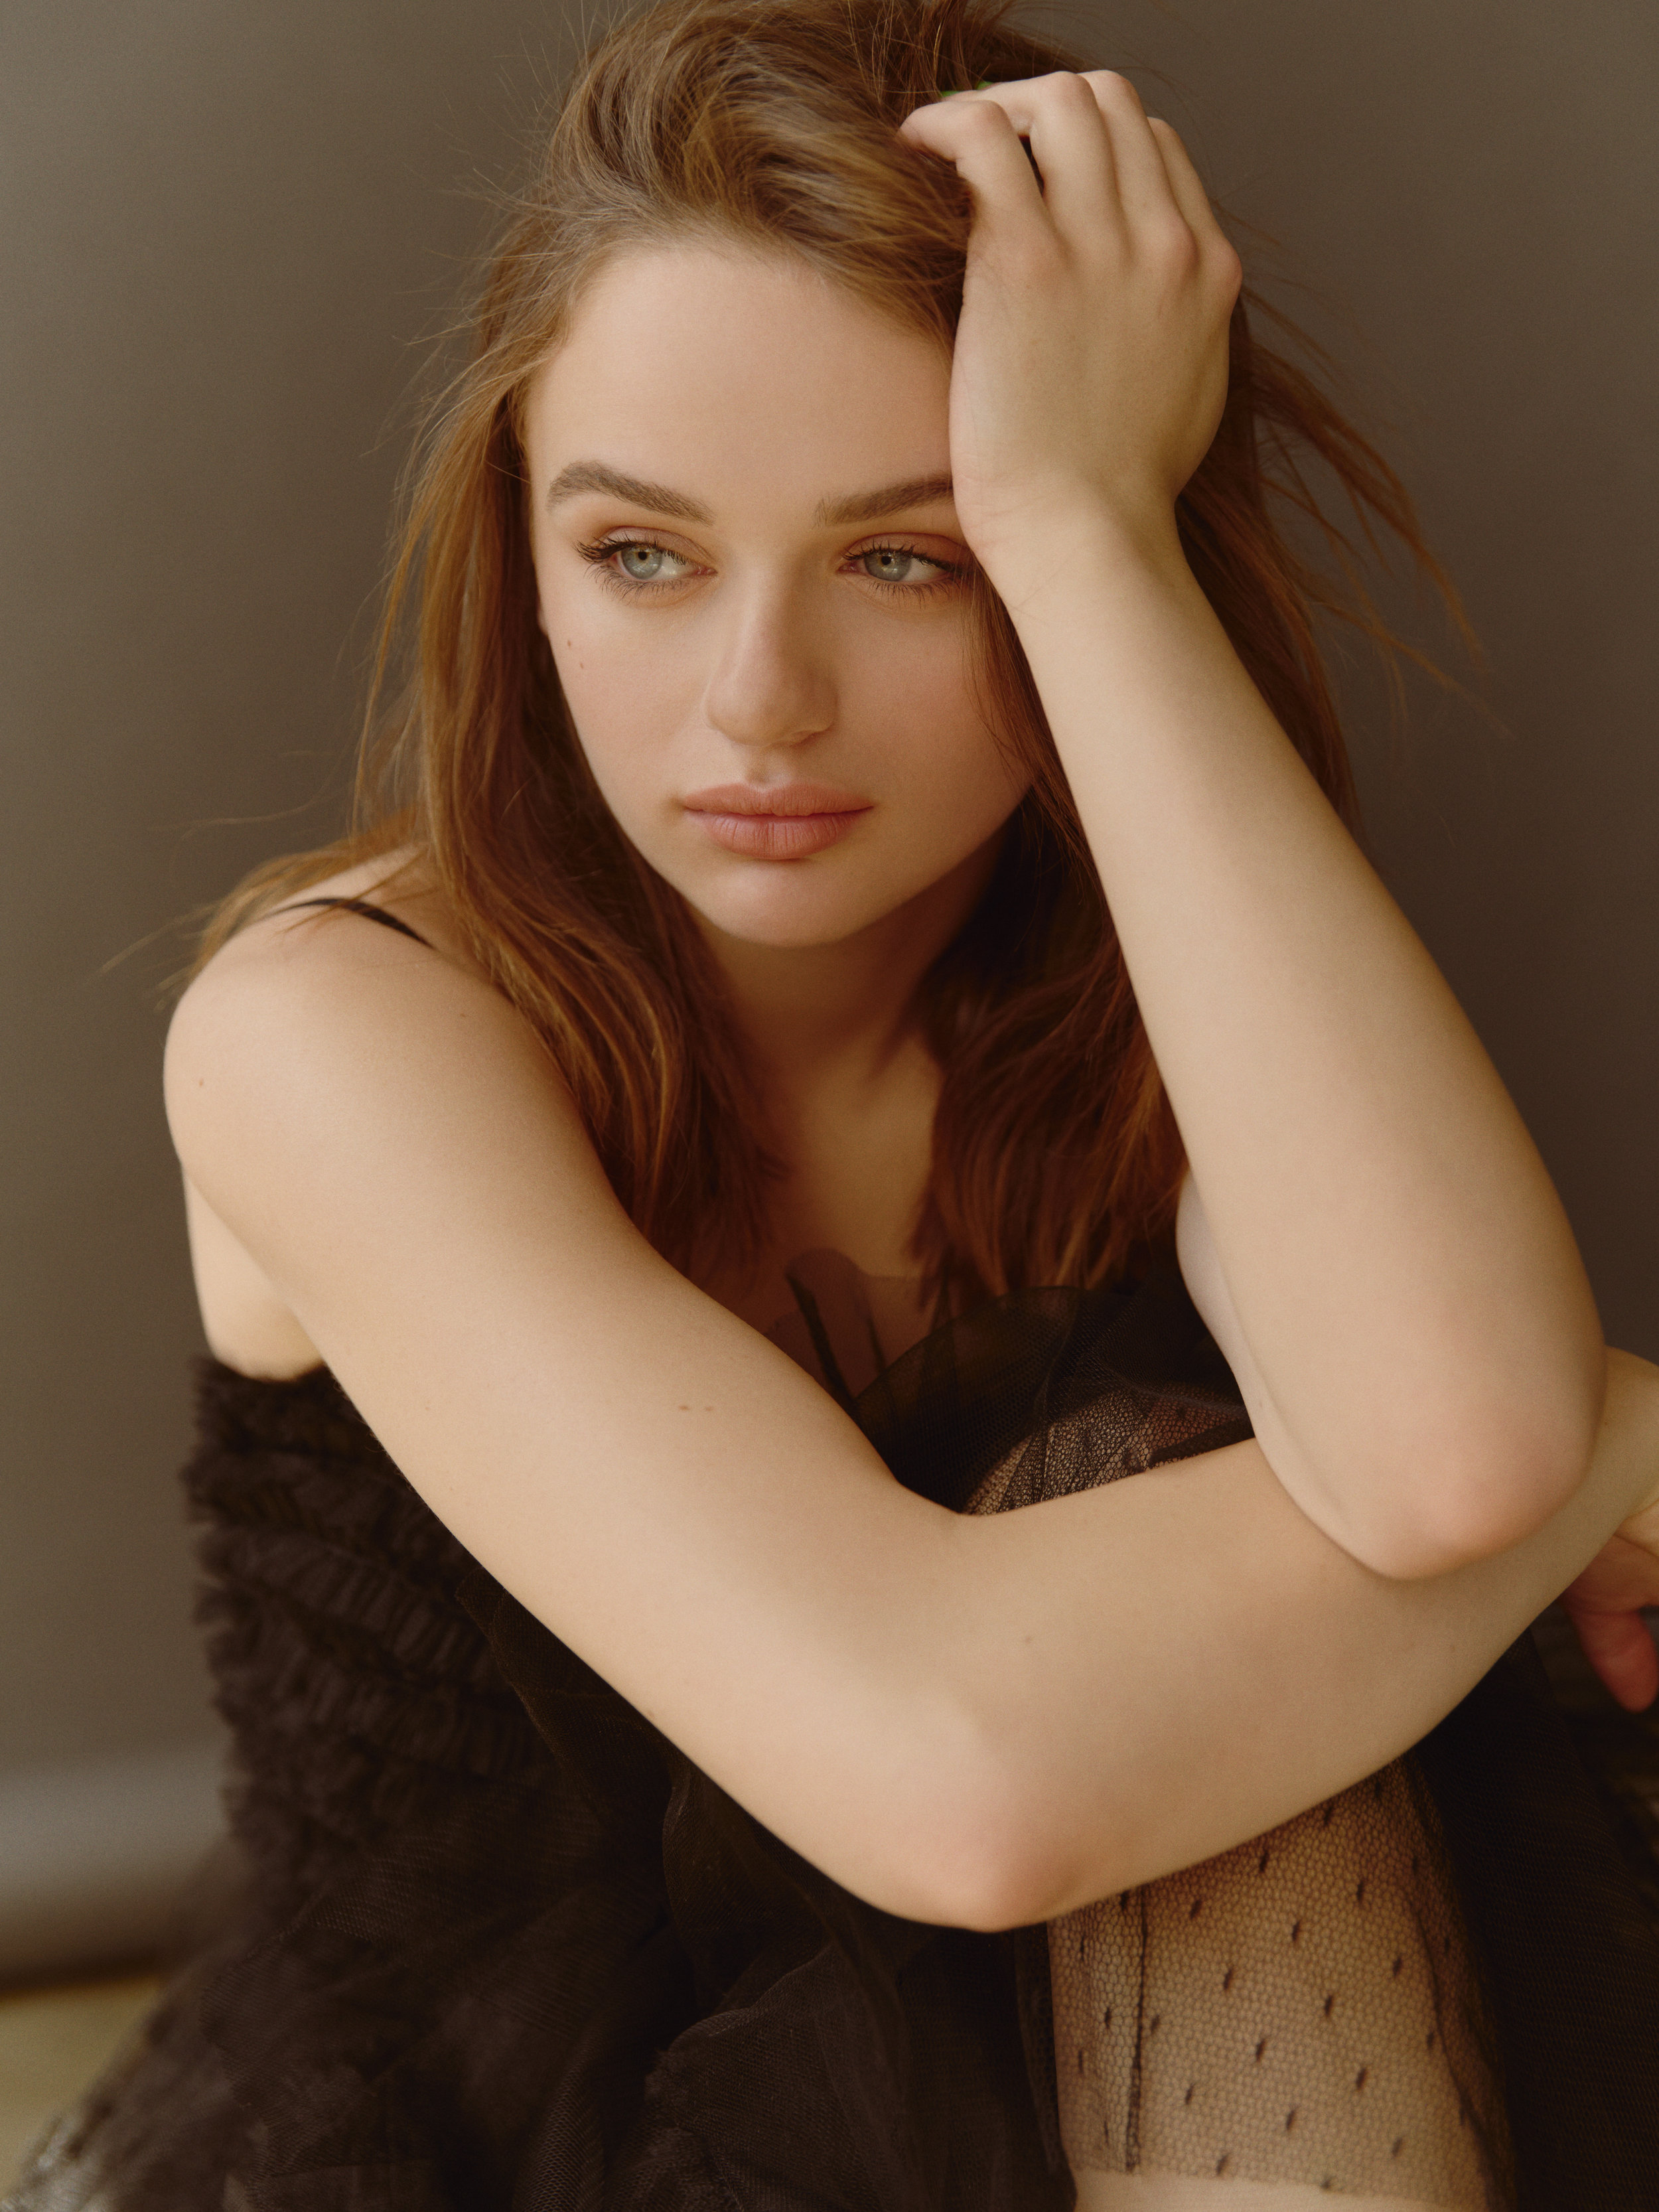 20180416_TheLaterals_JoeyKIng_S02_102-F.jpg